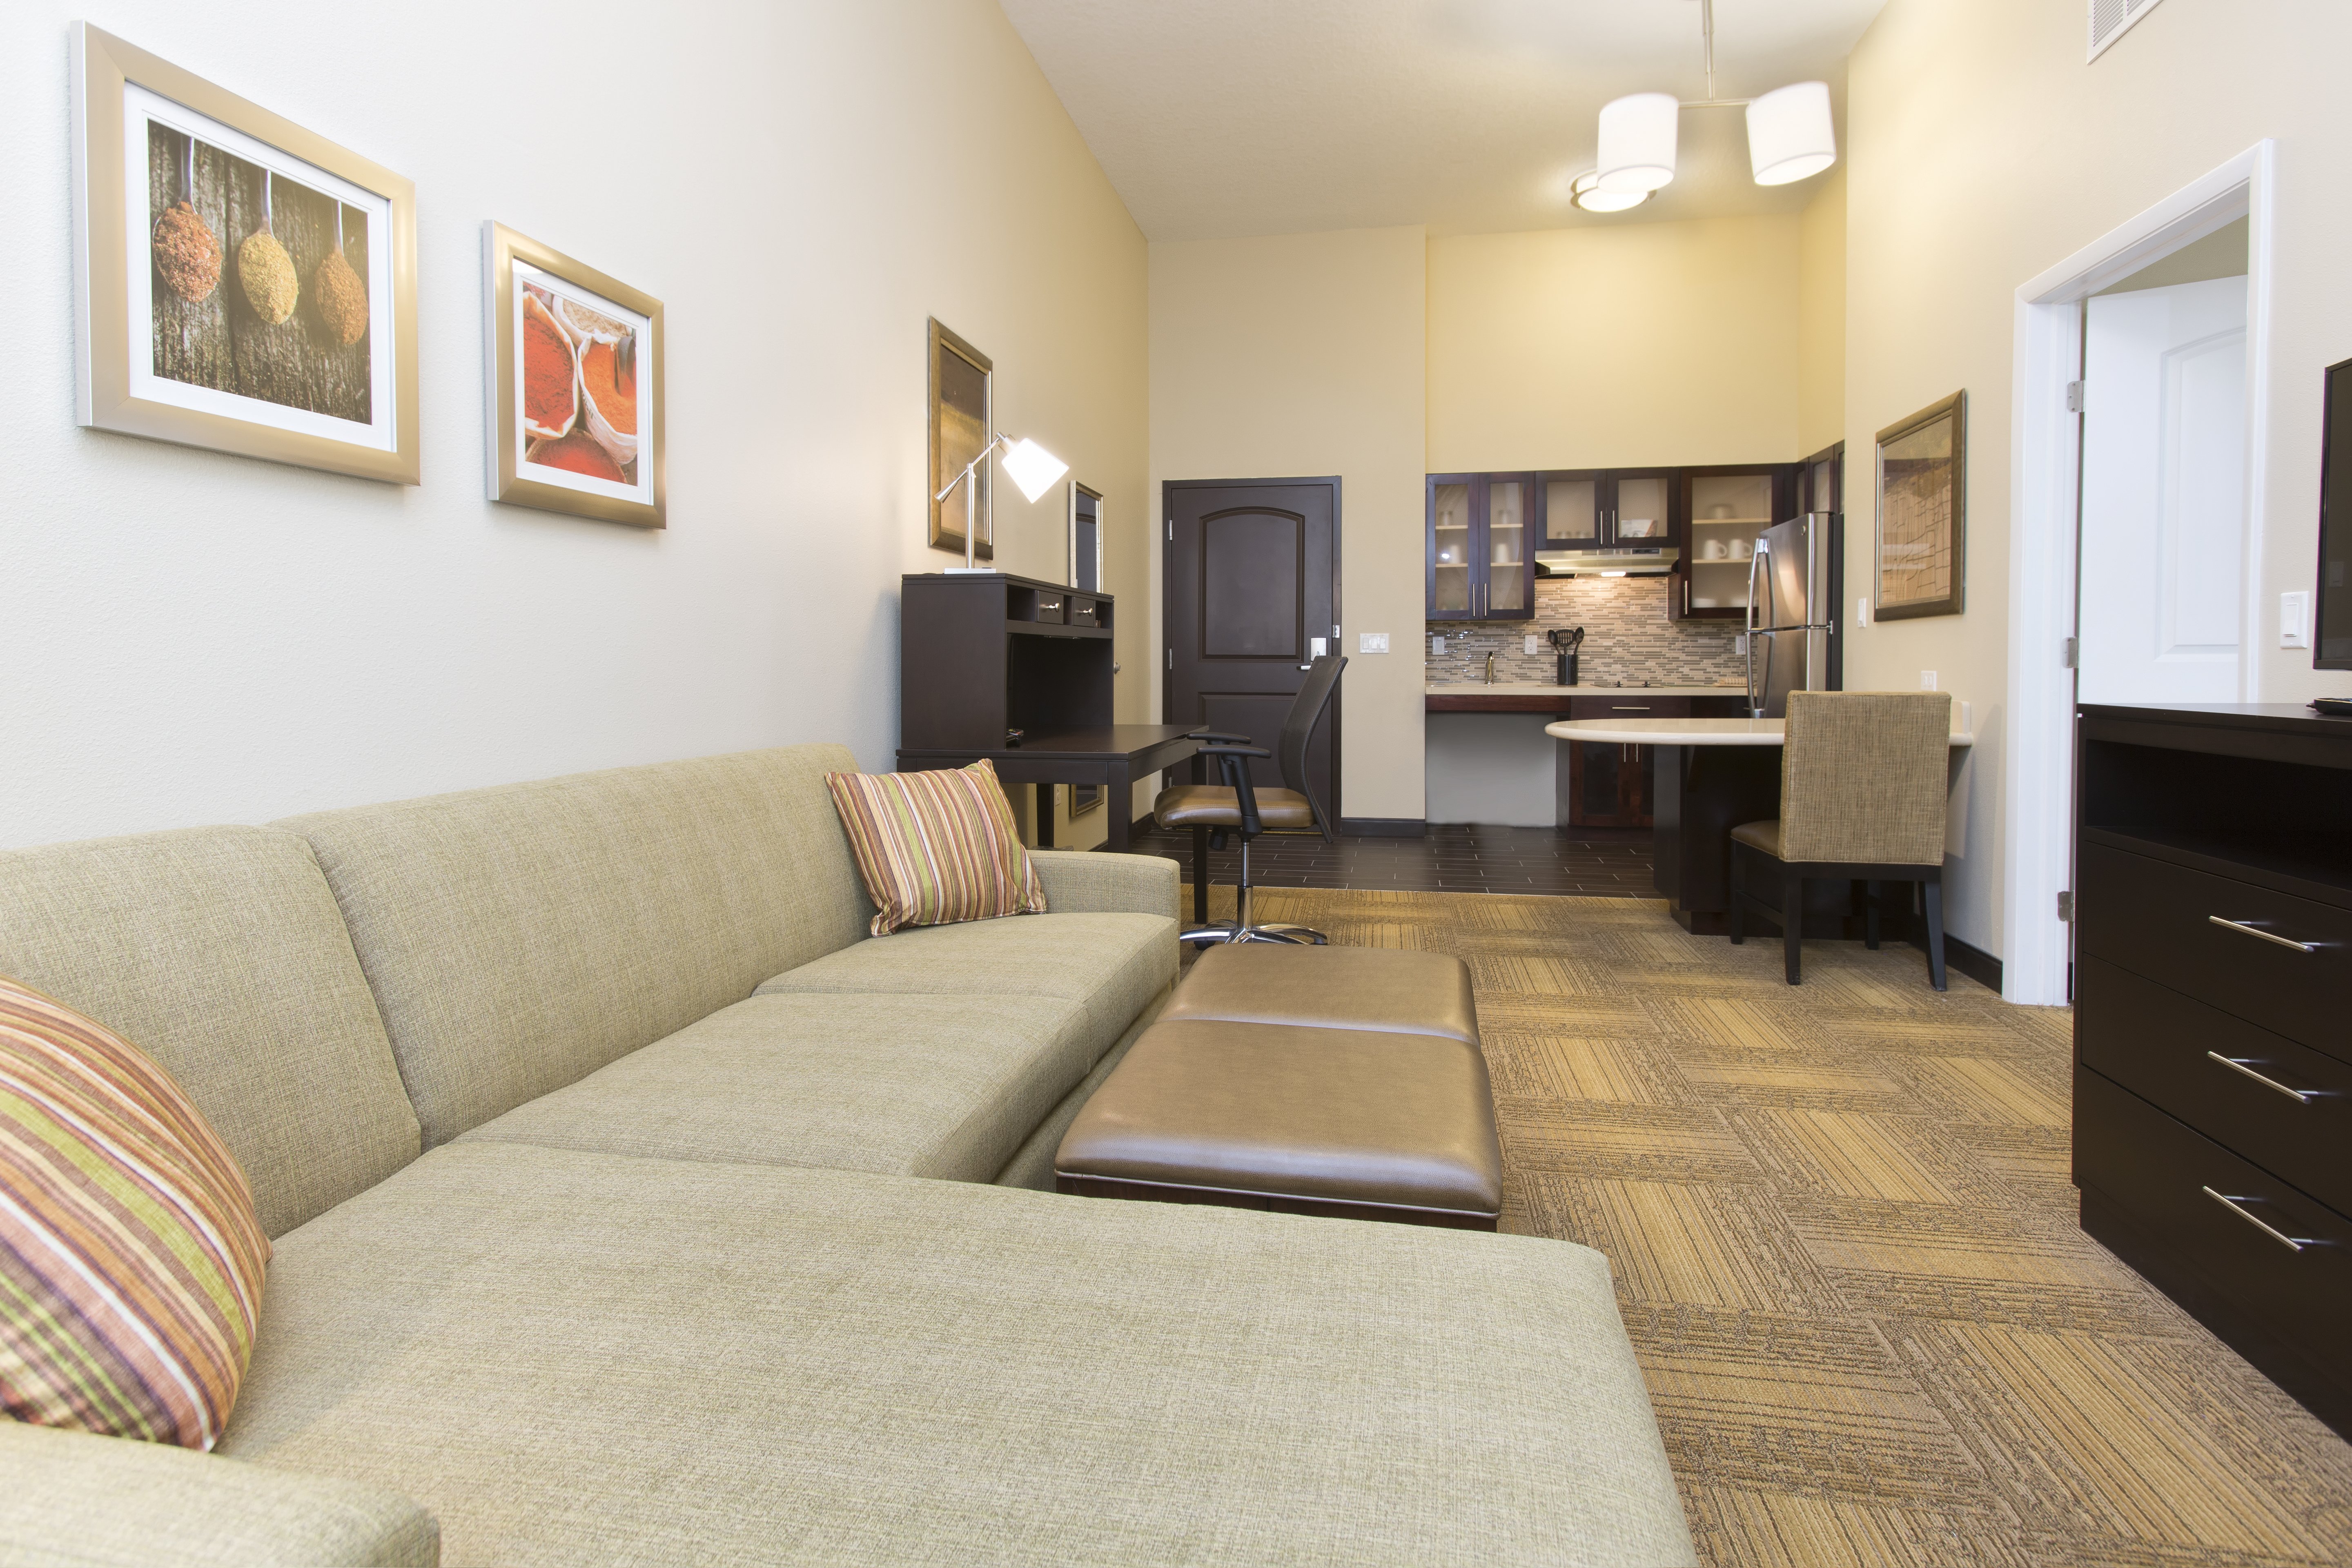 Our spacious Suites offer plenty of room to get around